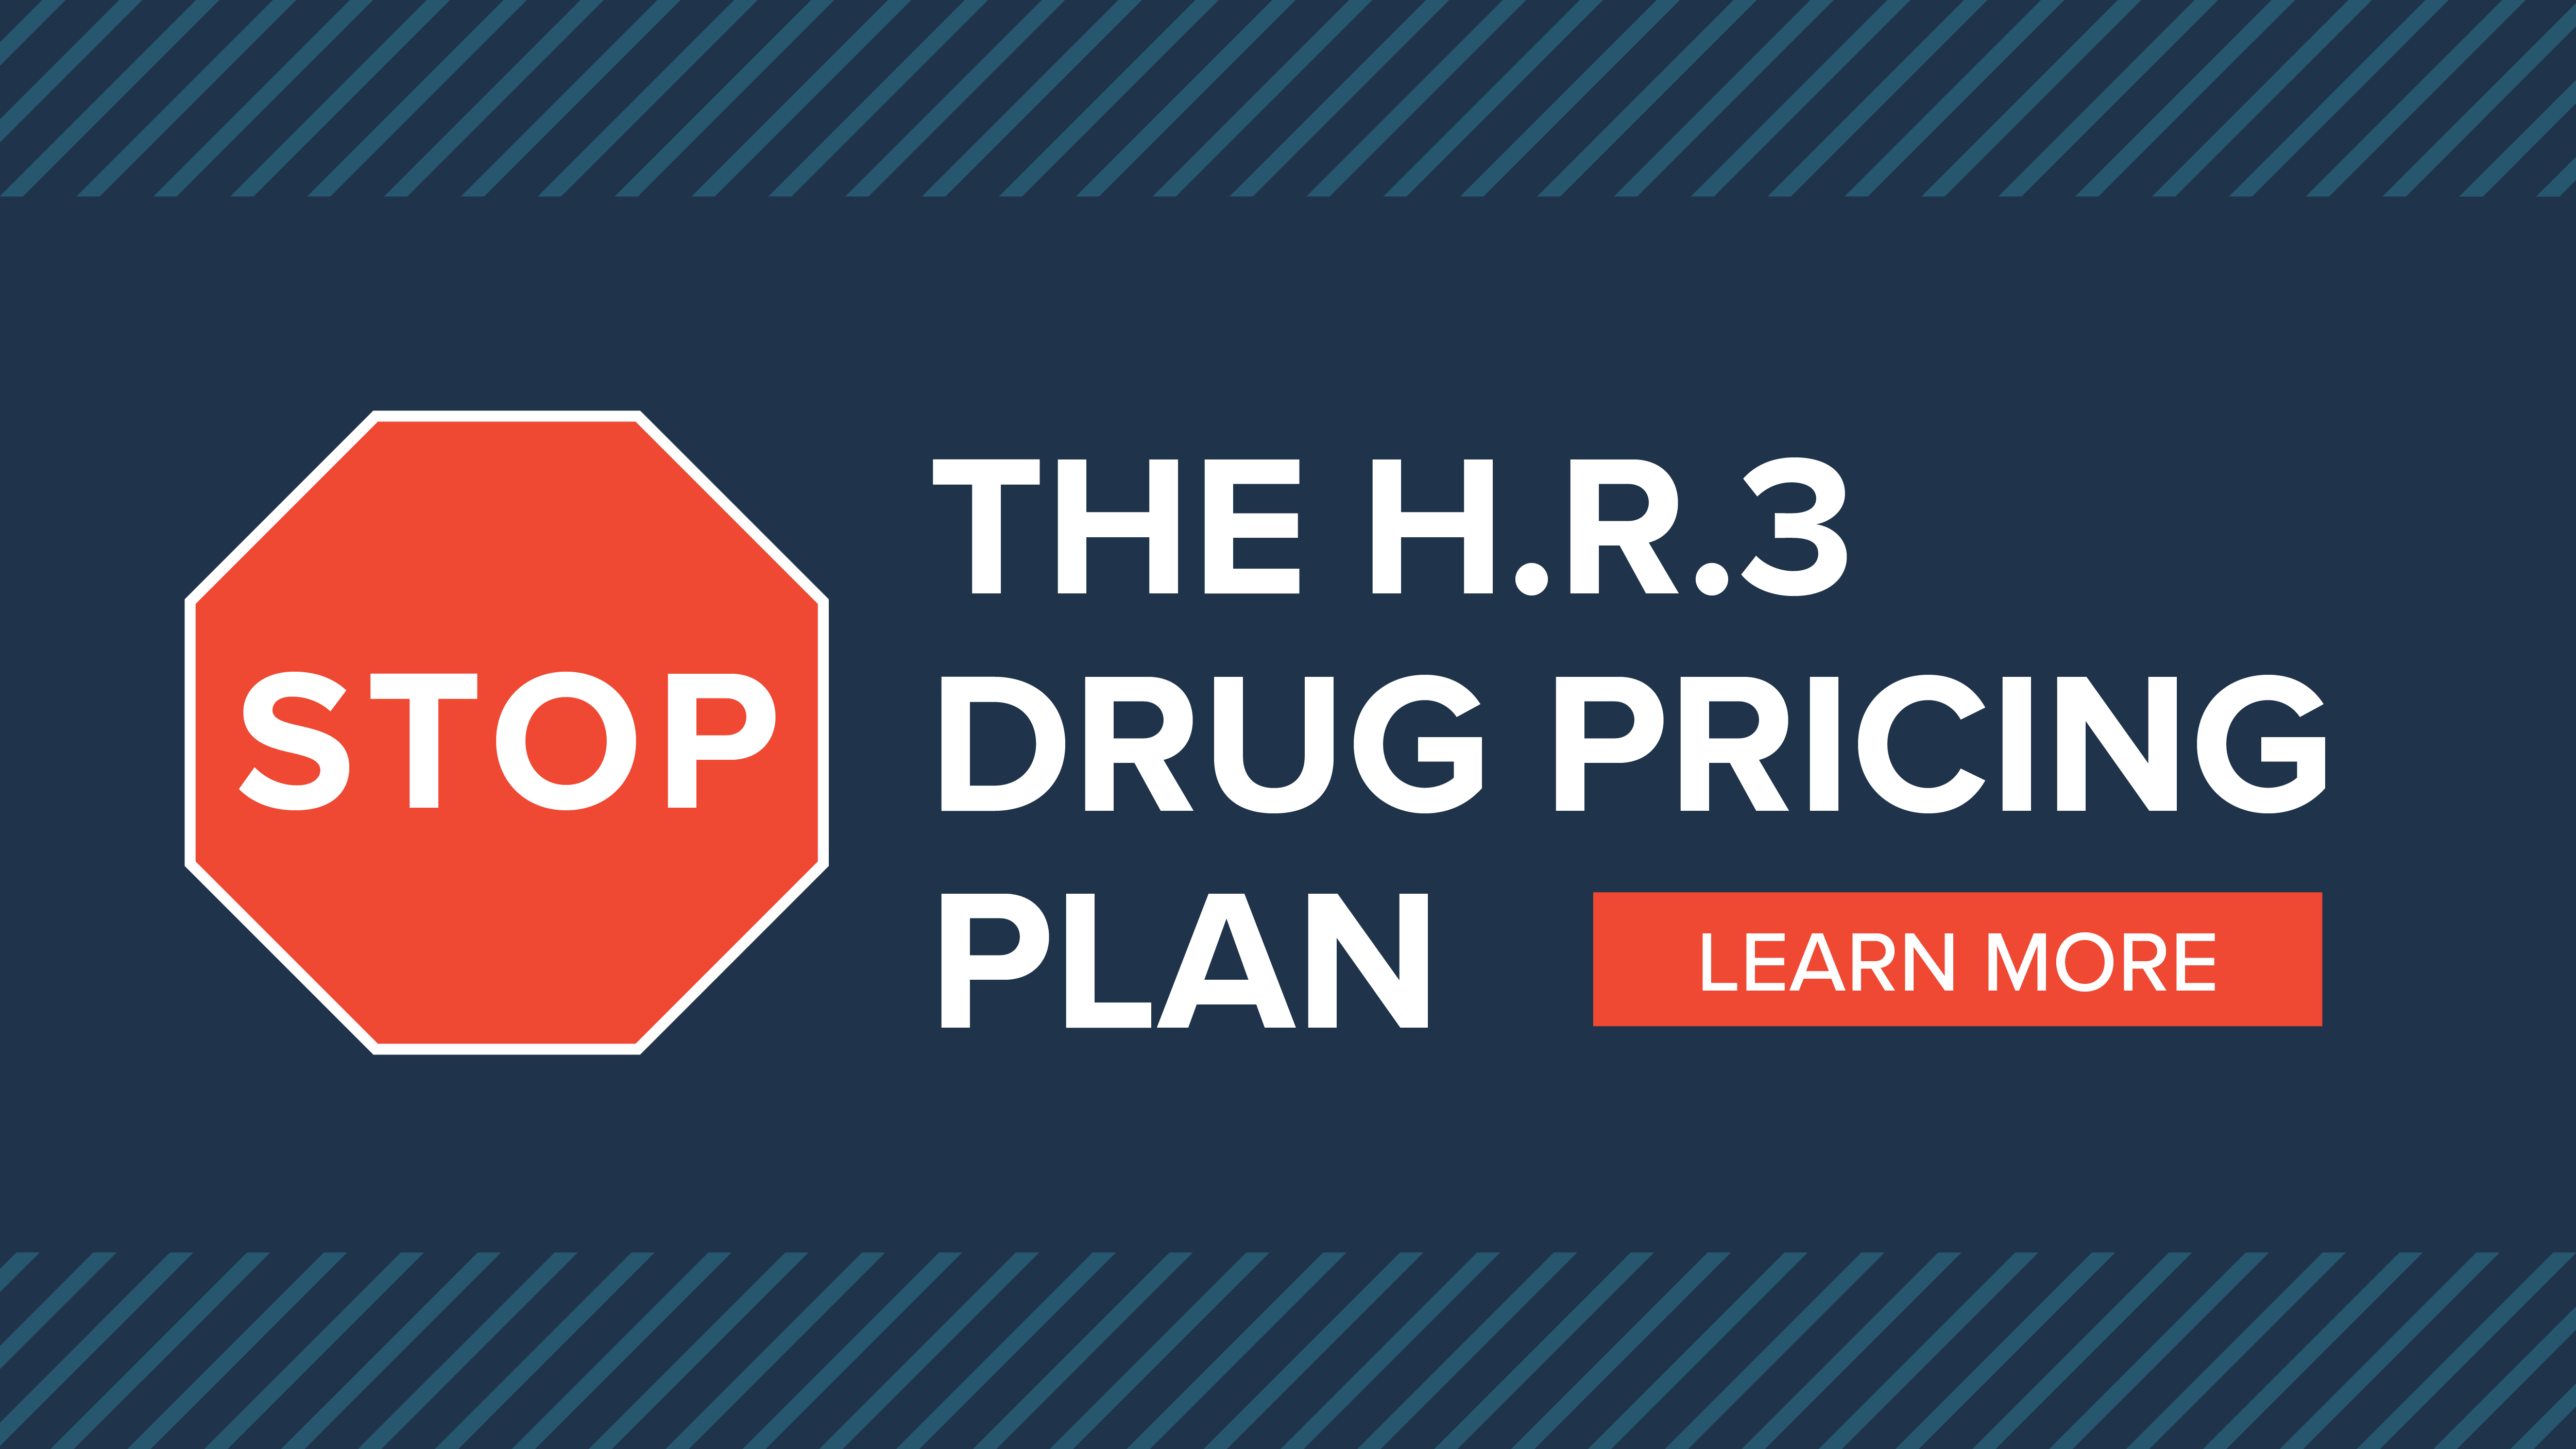 hr-3-threatens-access-to-medicines-future-innovation-and-american-jobs